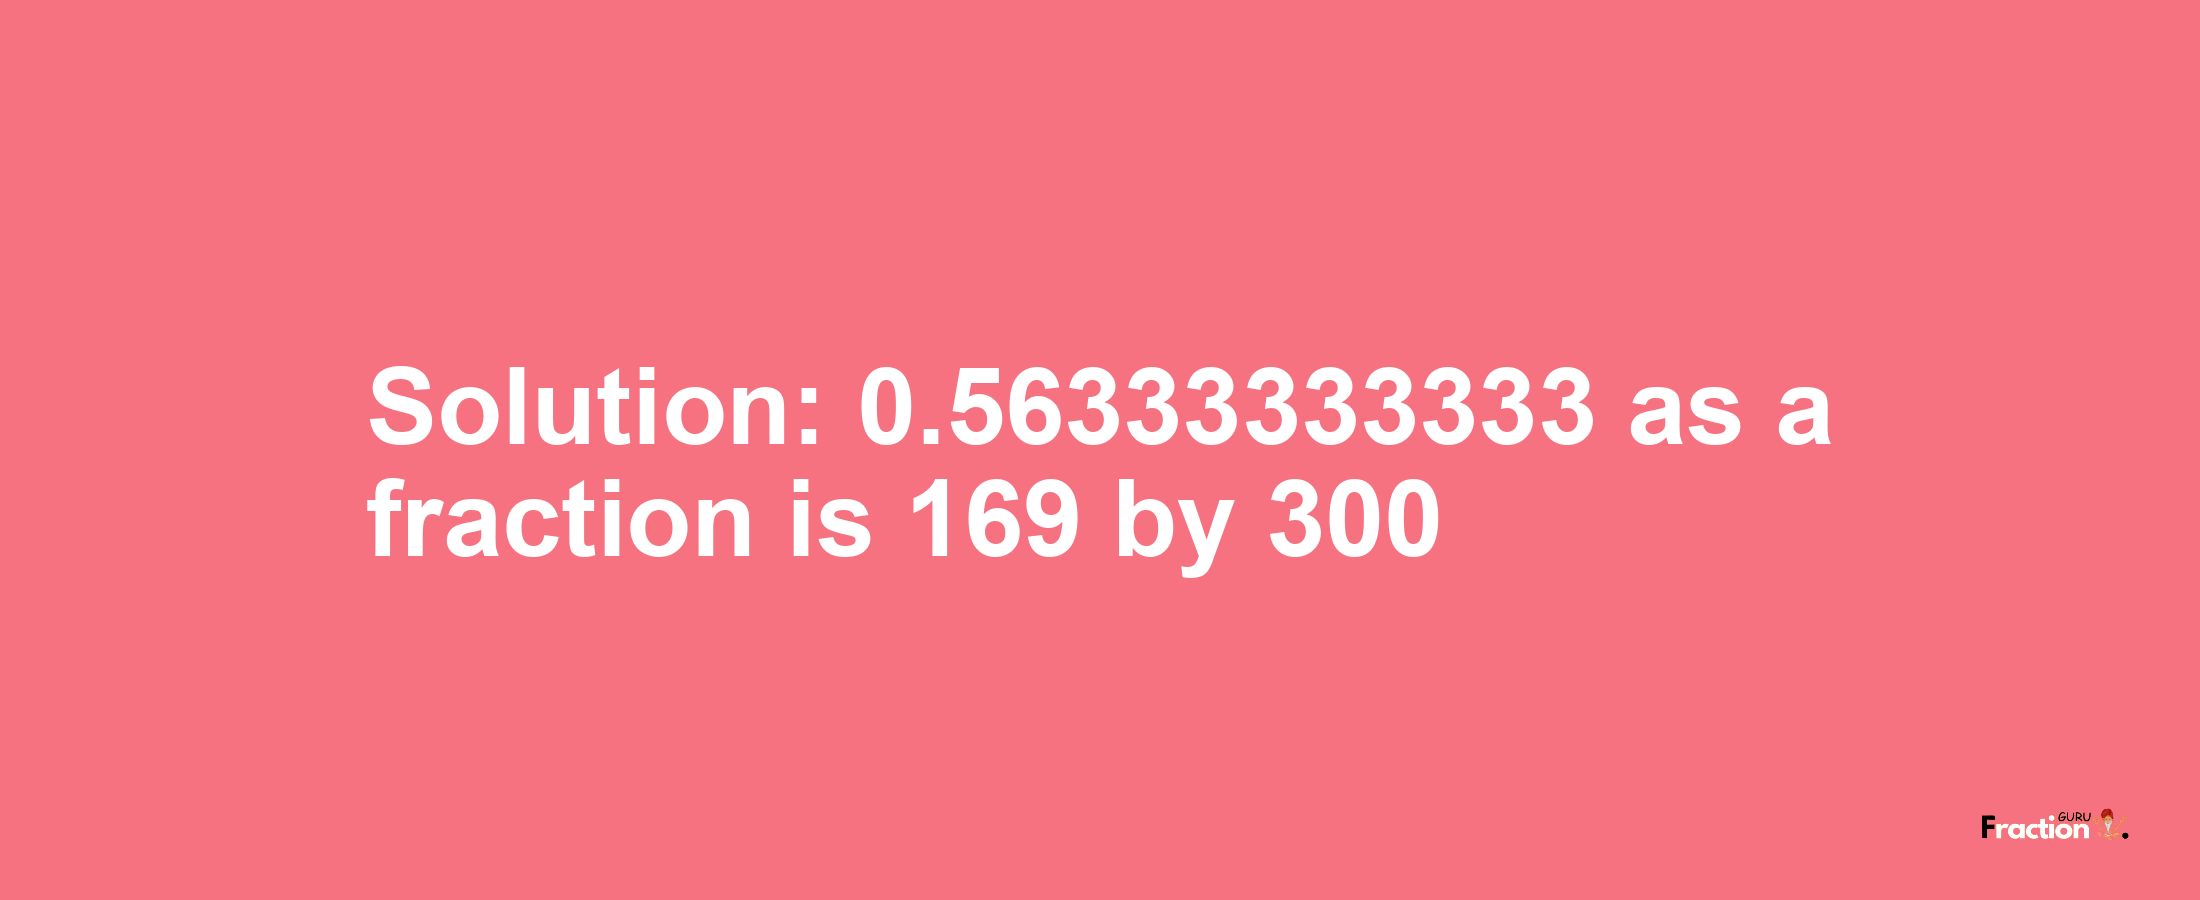 Solution:0.56333333333 as a fraction is 169/300